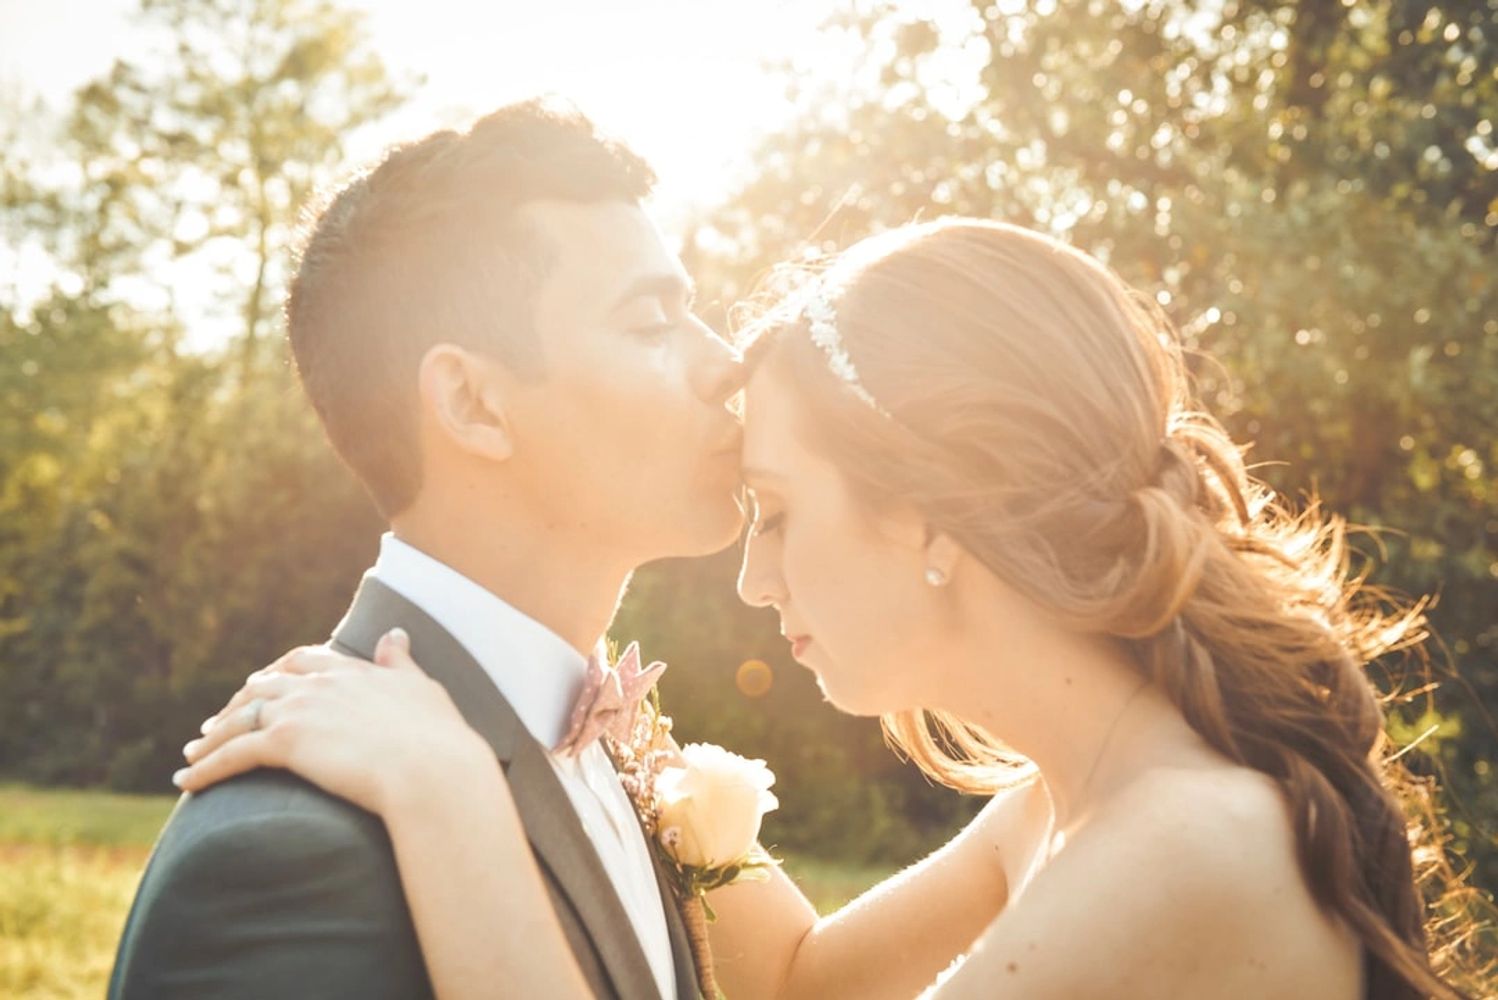 Groom kissing bride on forehead after wedding on natural, native Texas property with light streaming